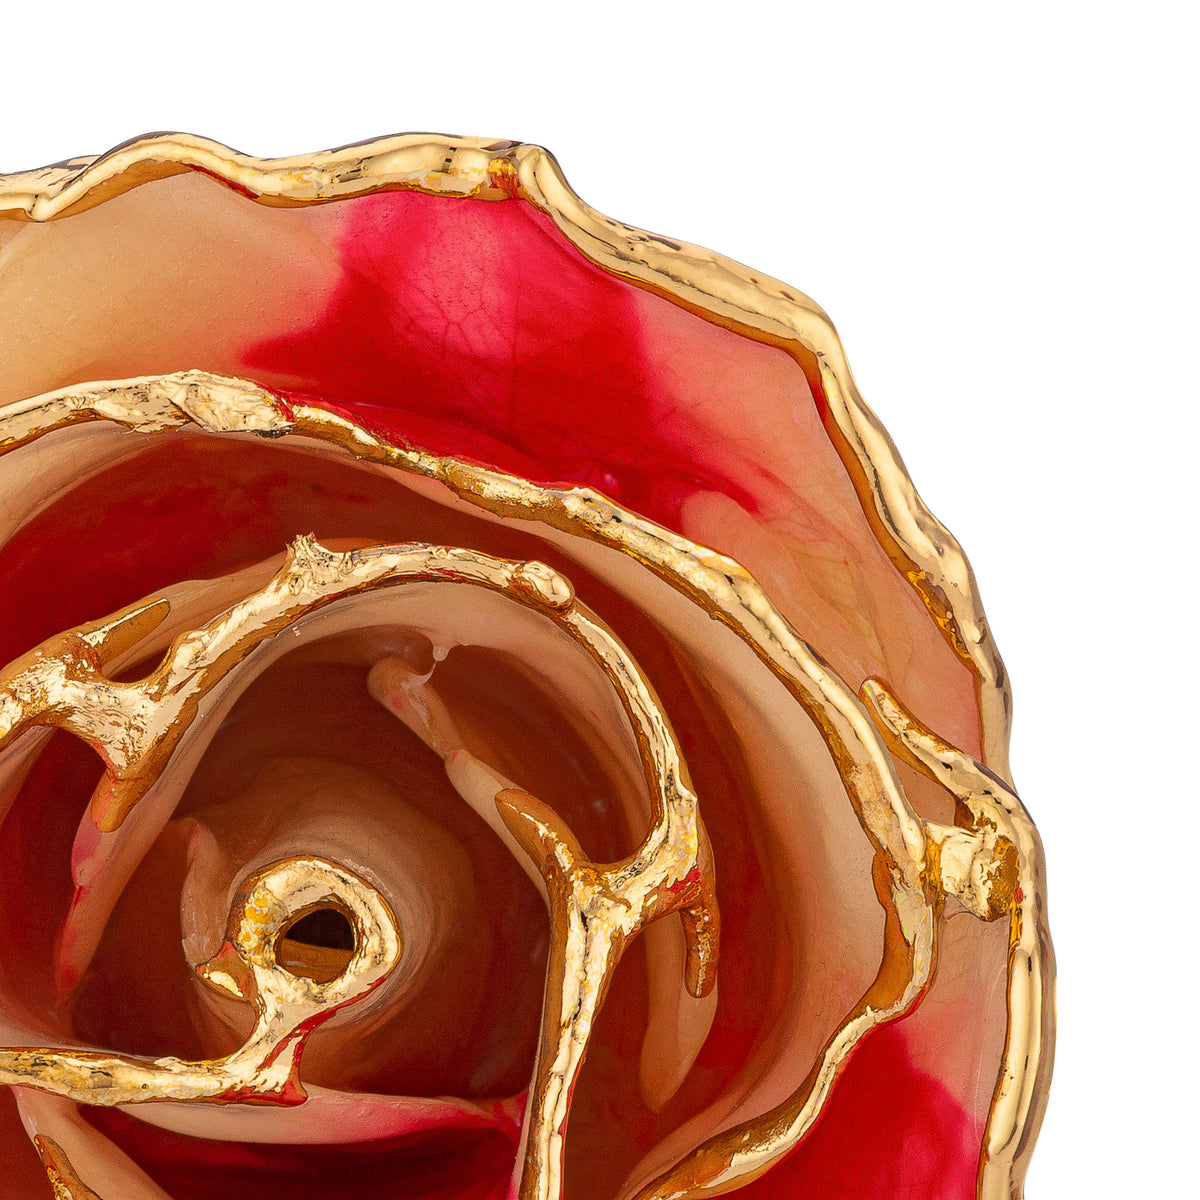 24K Gold Trimmed Forever Rose with Peppermint Striped Petals. View of Stem, Leaves, and Rose Petals and Showing Detail of Gold Trim zoomed in view from top